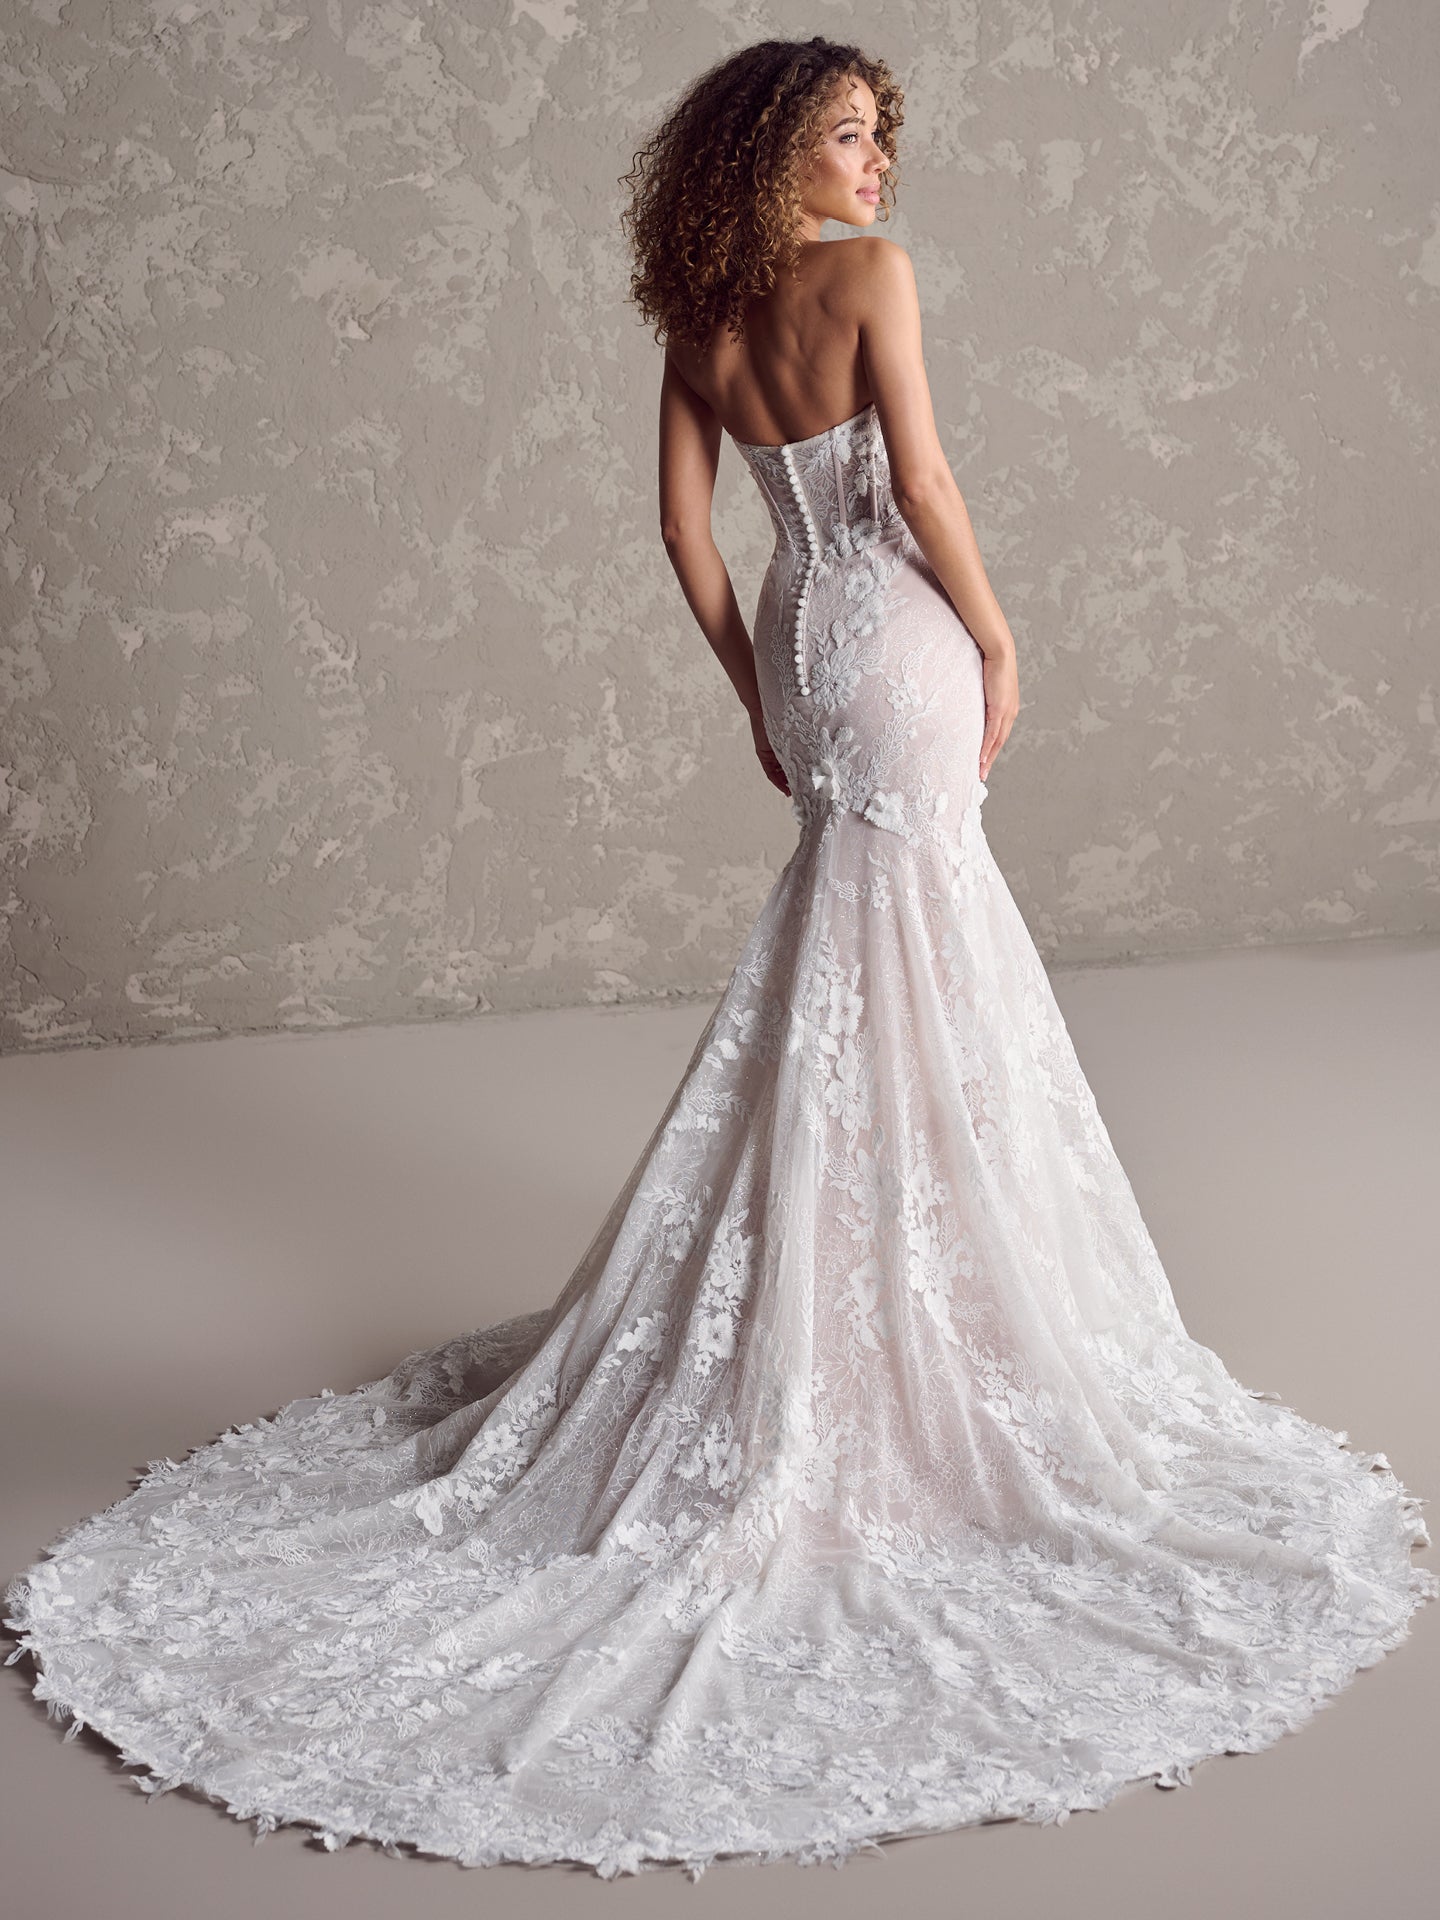 Strapless Floral Fit-and-Flare Gown by Maggie Sottero - Image 2